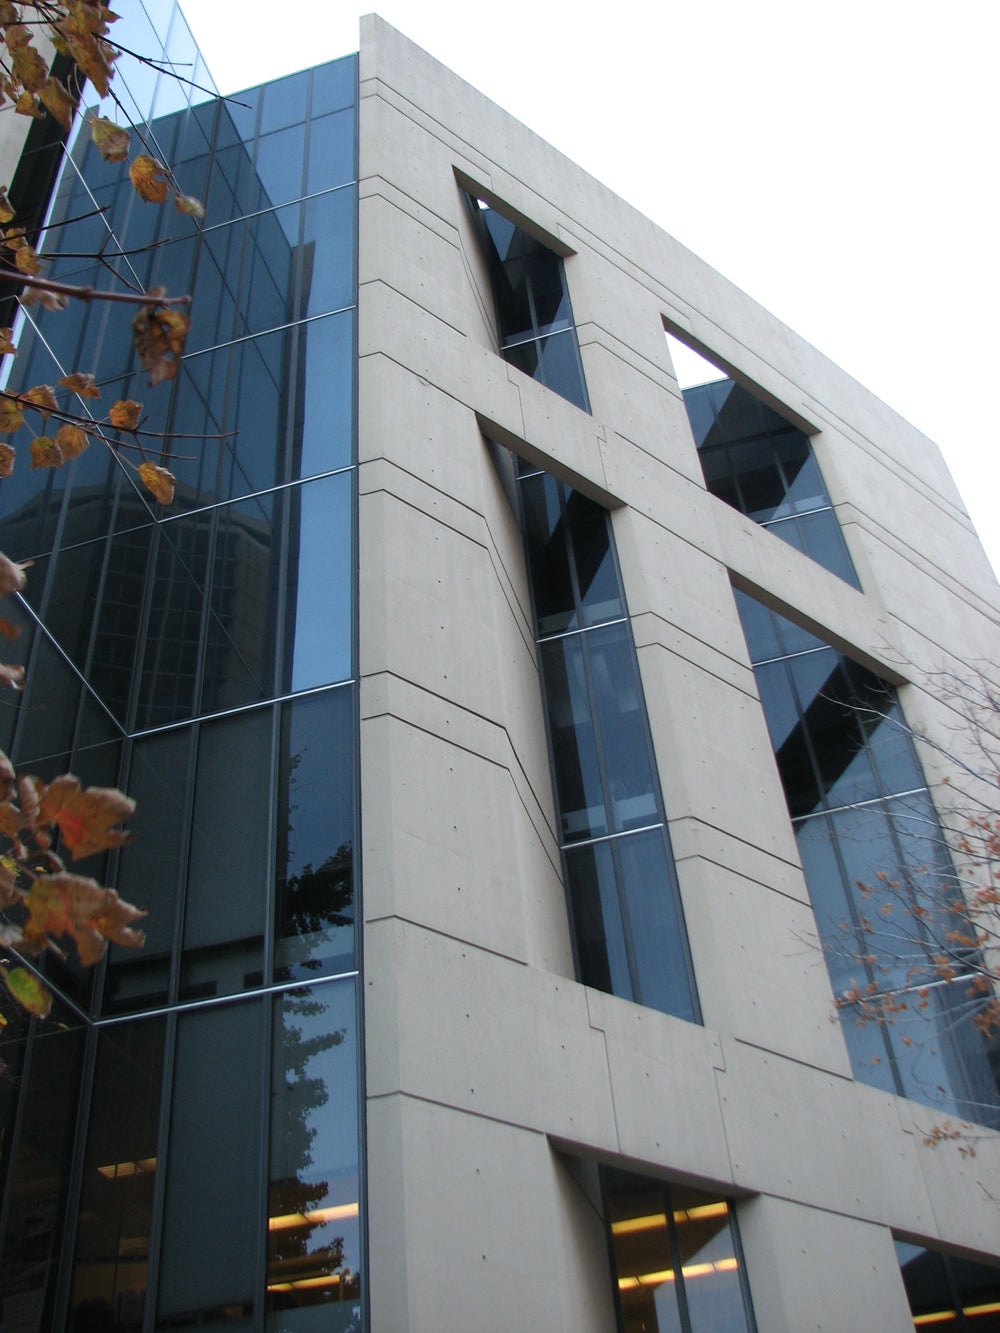 The south elevation of the United Way Building.